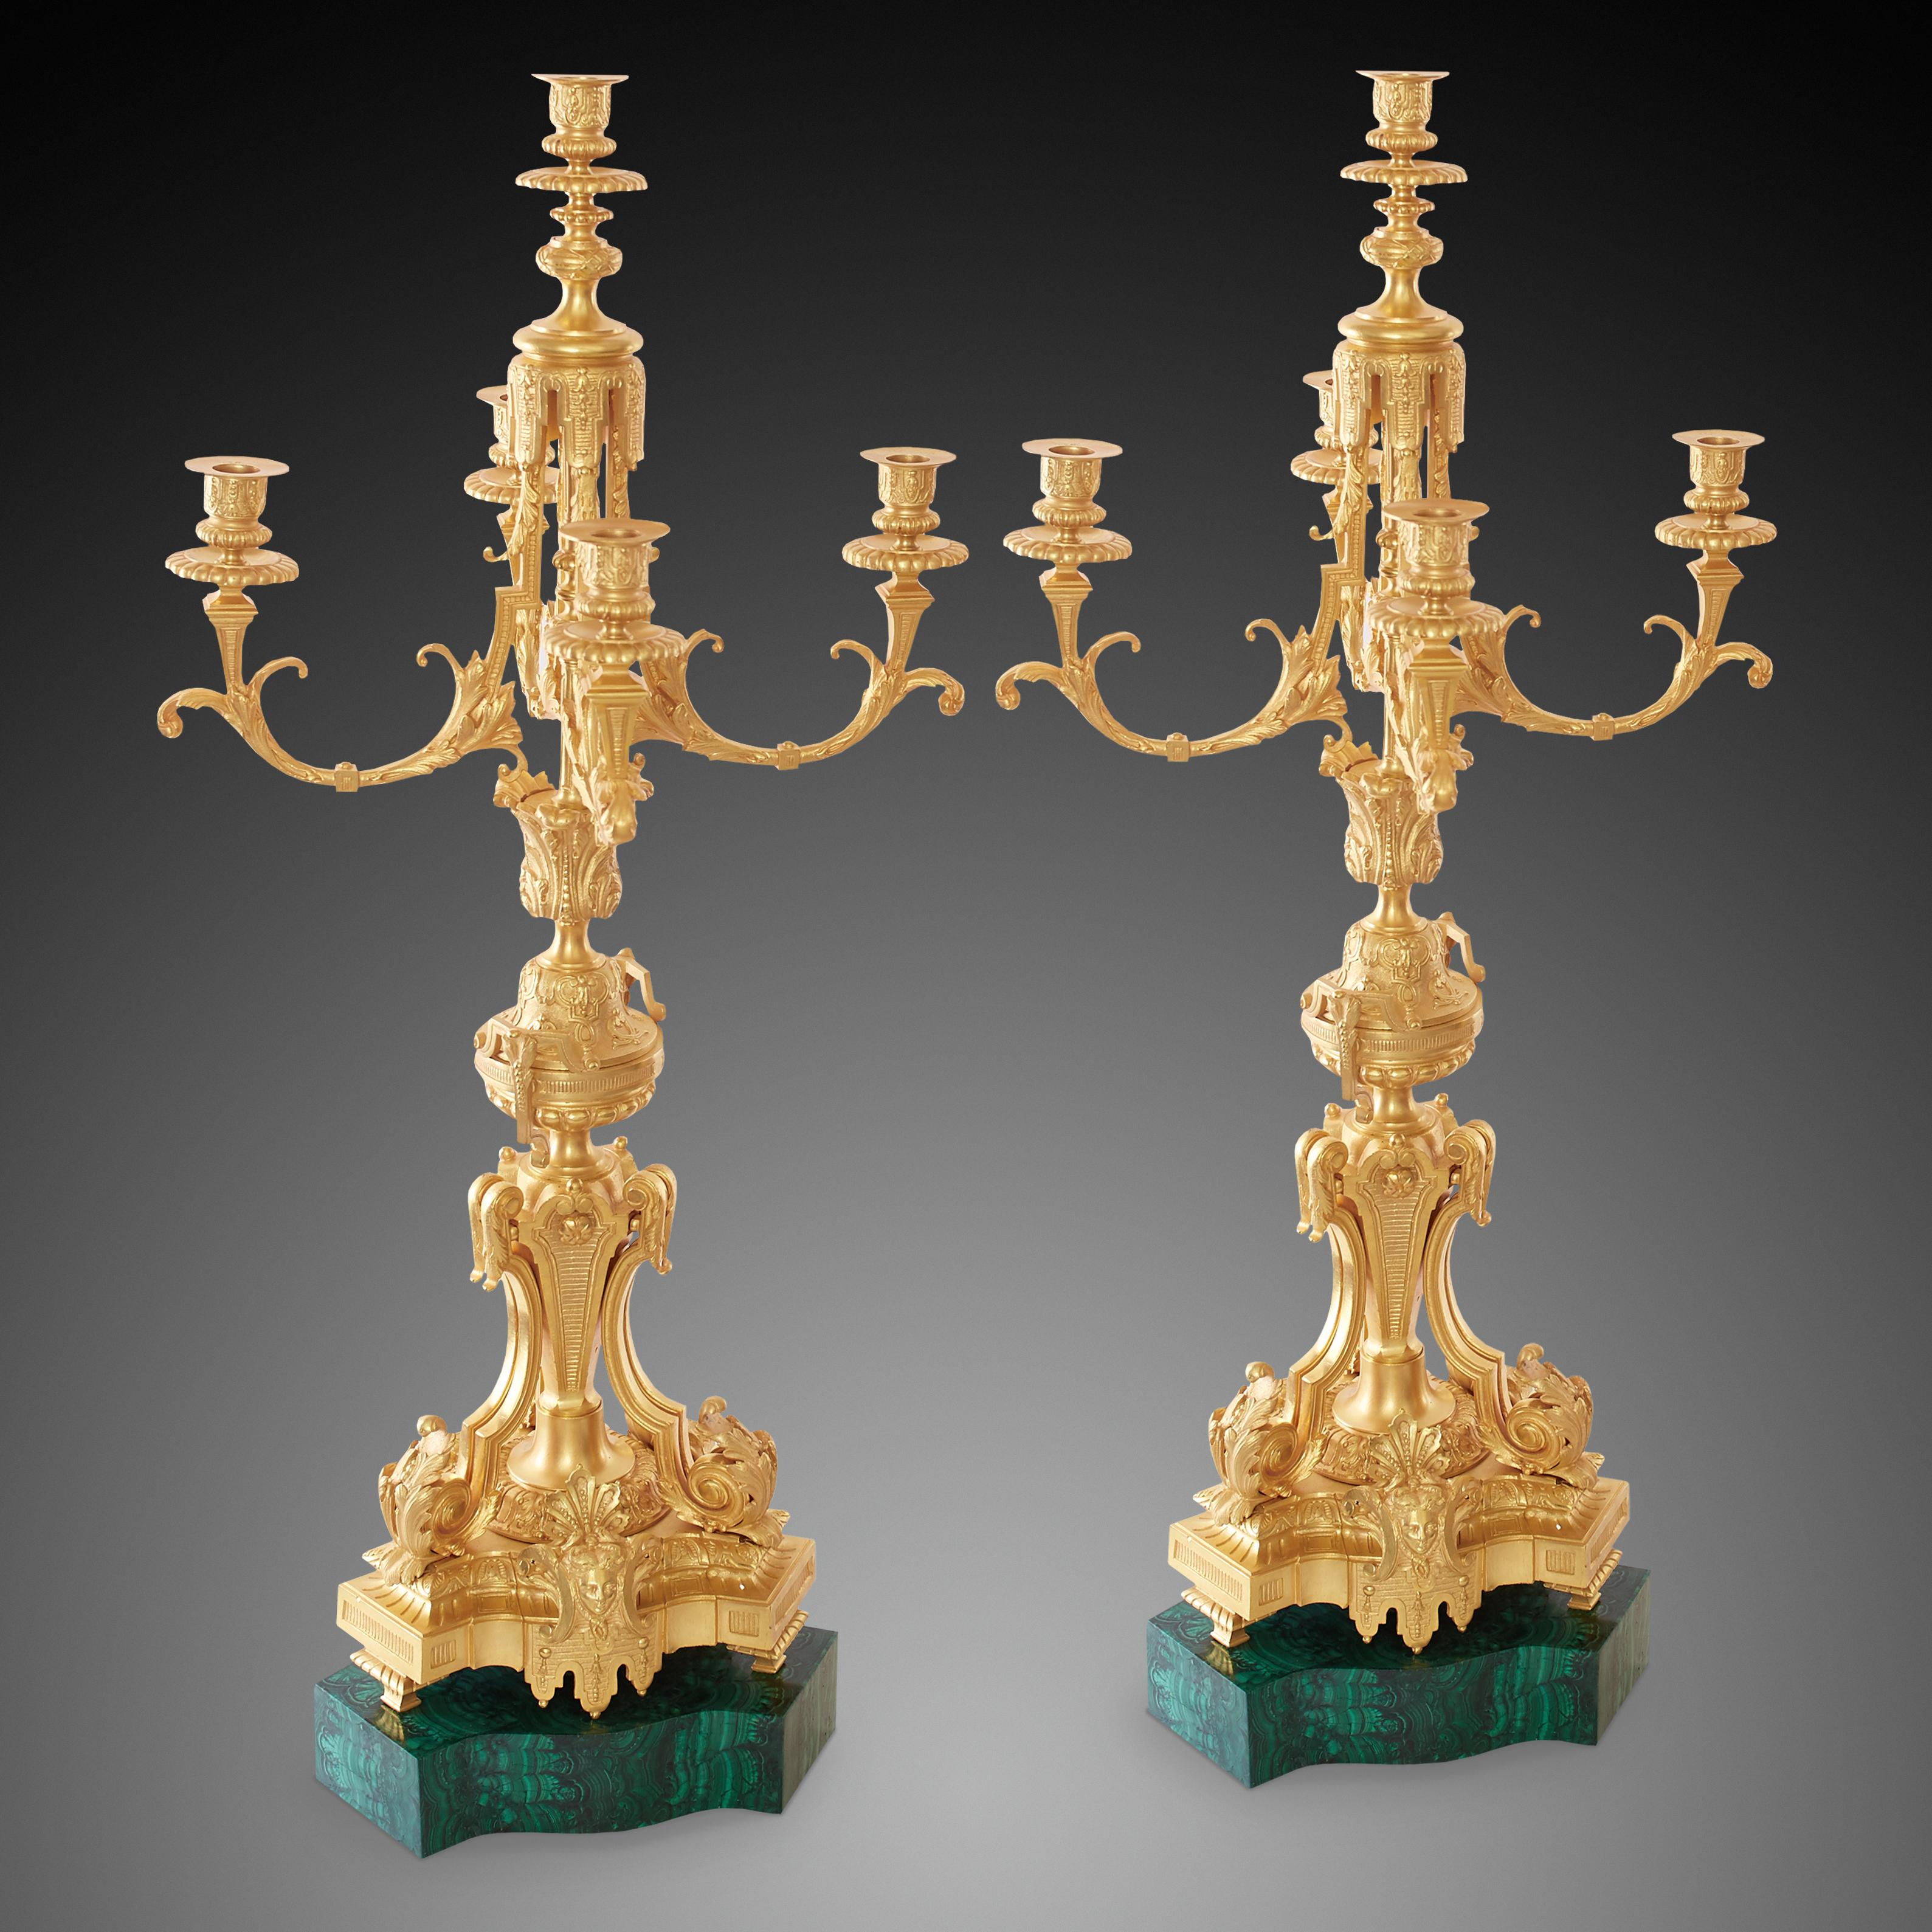 Each candlestick is placed on a stone made of malachite on which there is a base decorated with floral forms with the image of a woman's face on both sides. Above there are four decorative arms and a central frame located in the center.Everything